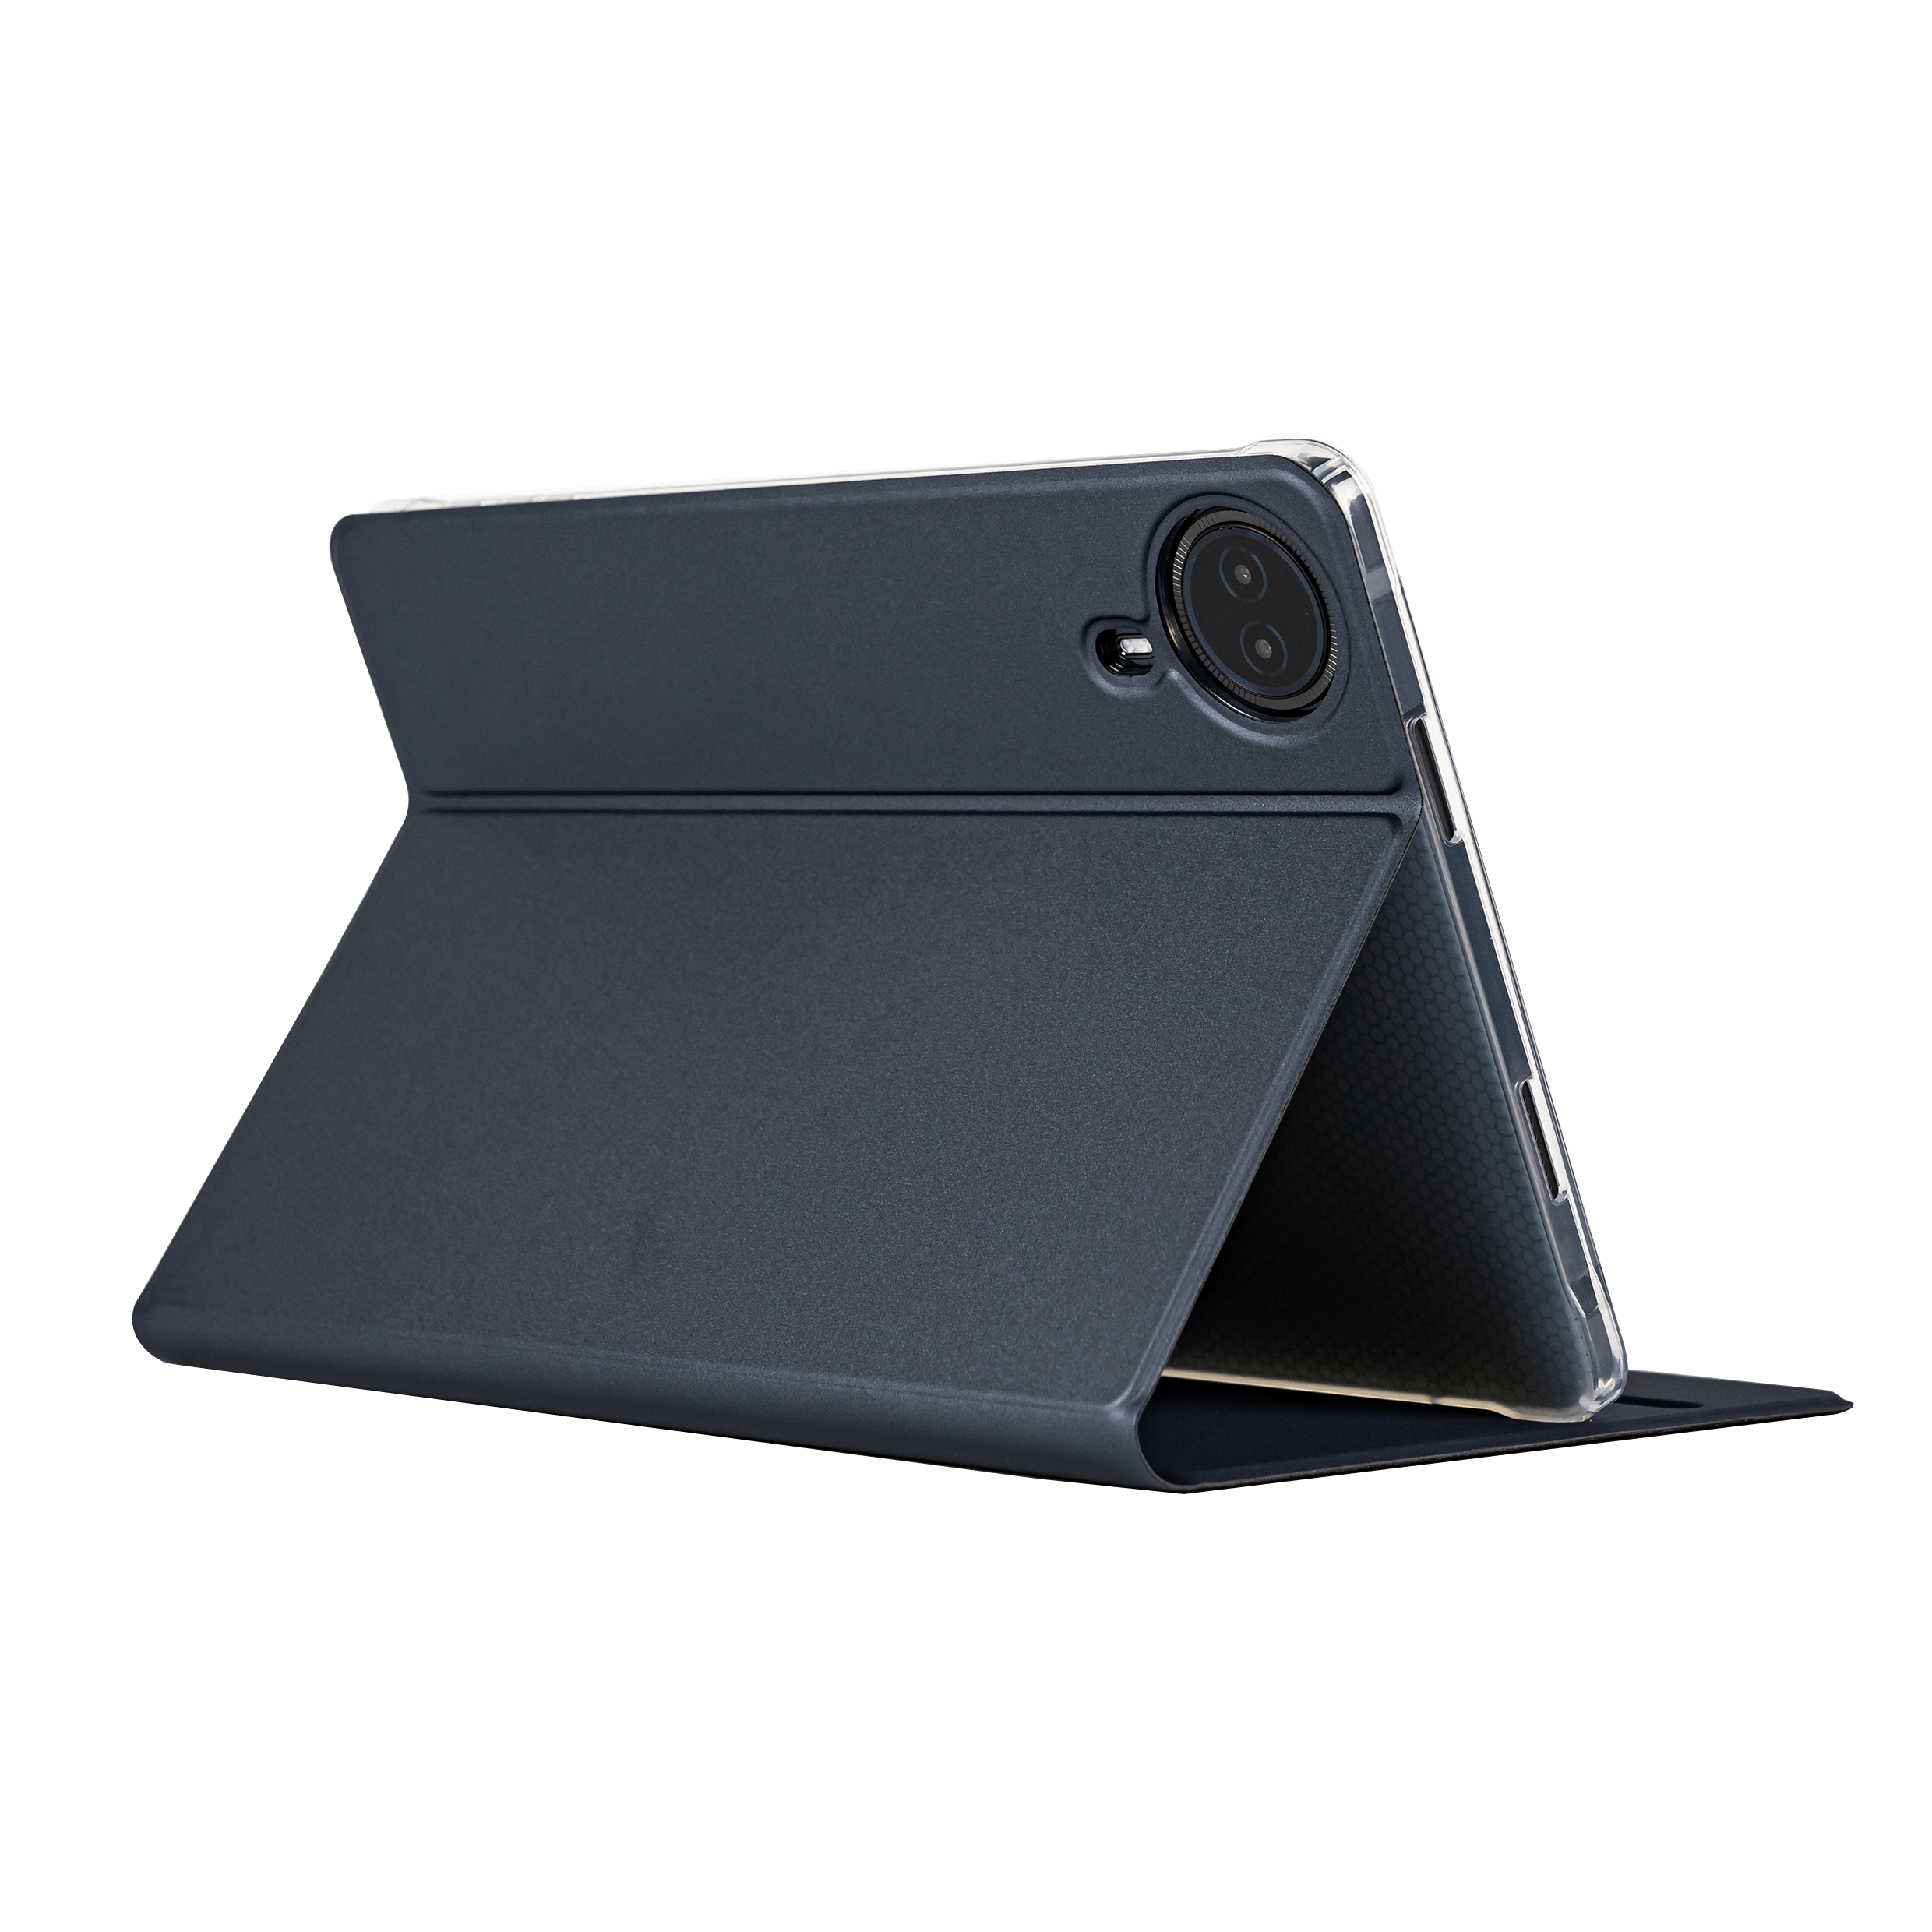 Teclast T50HD tablet encased in a luxurious deep sapphire folio case, showcasing a slim fit and clear access to cameras, speakers, and ports.